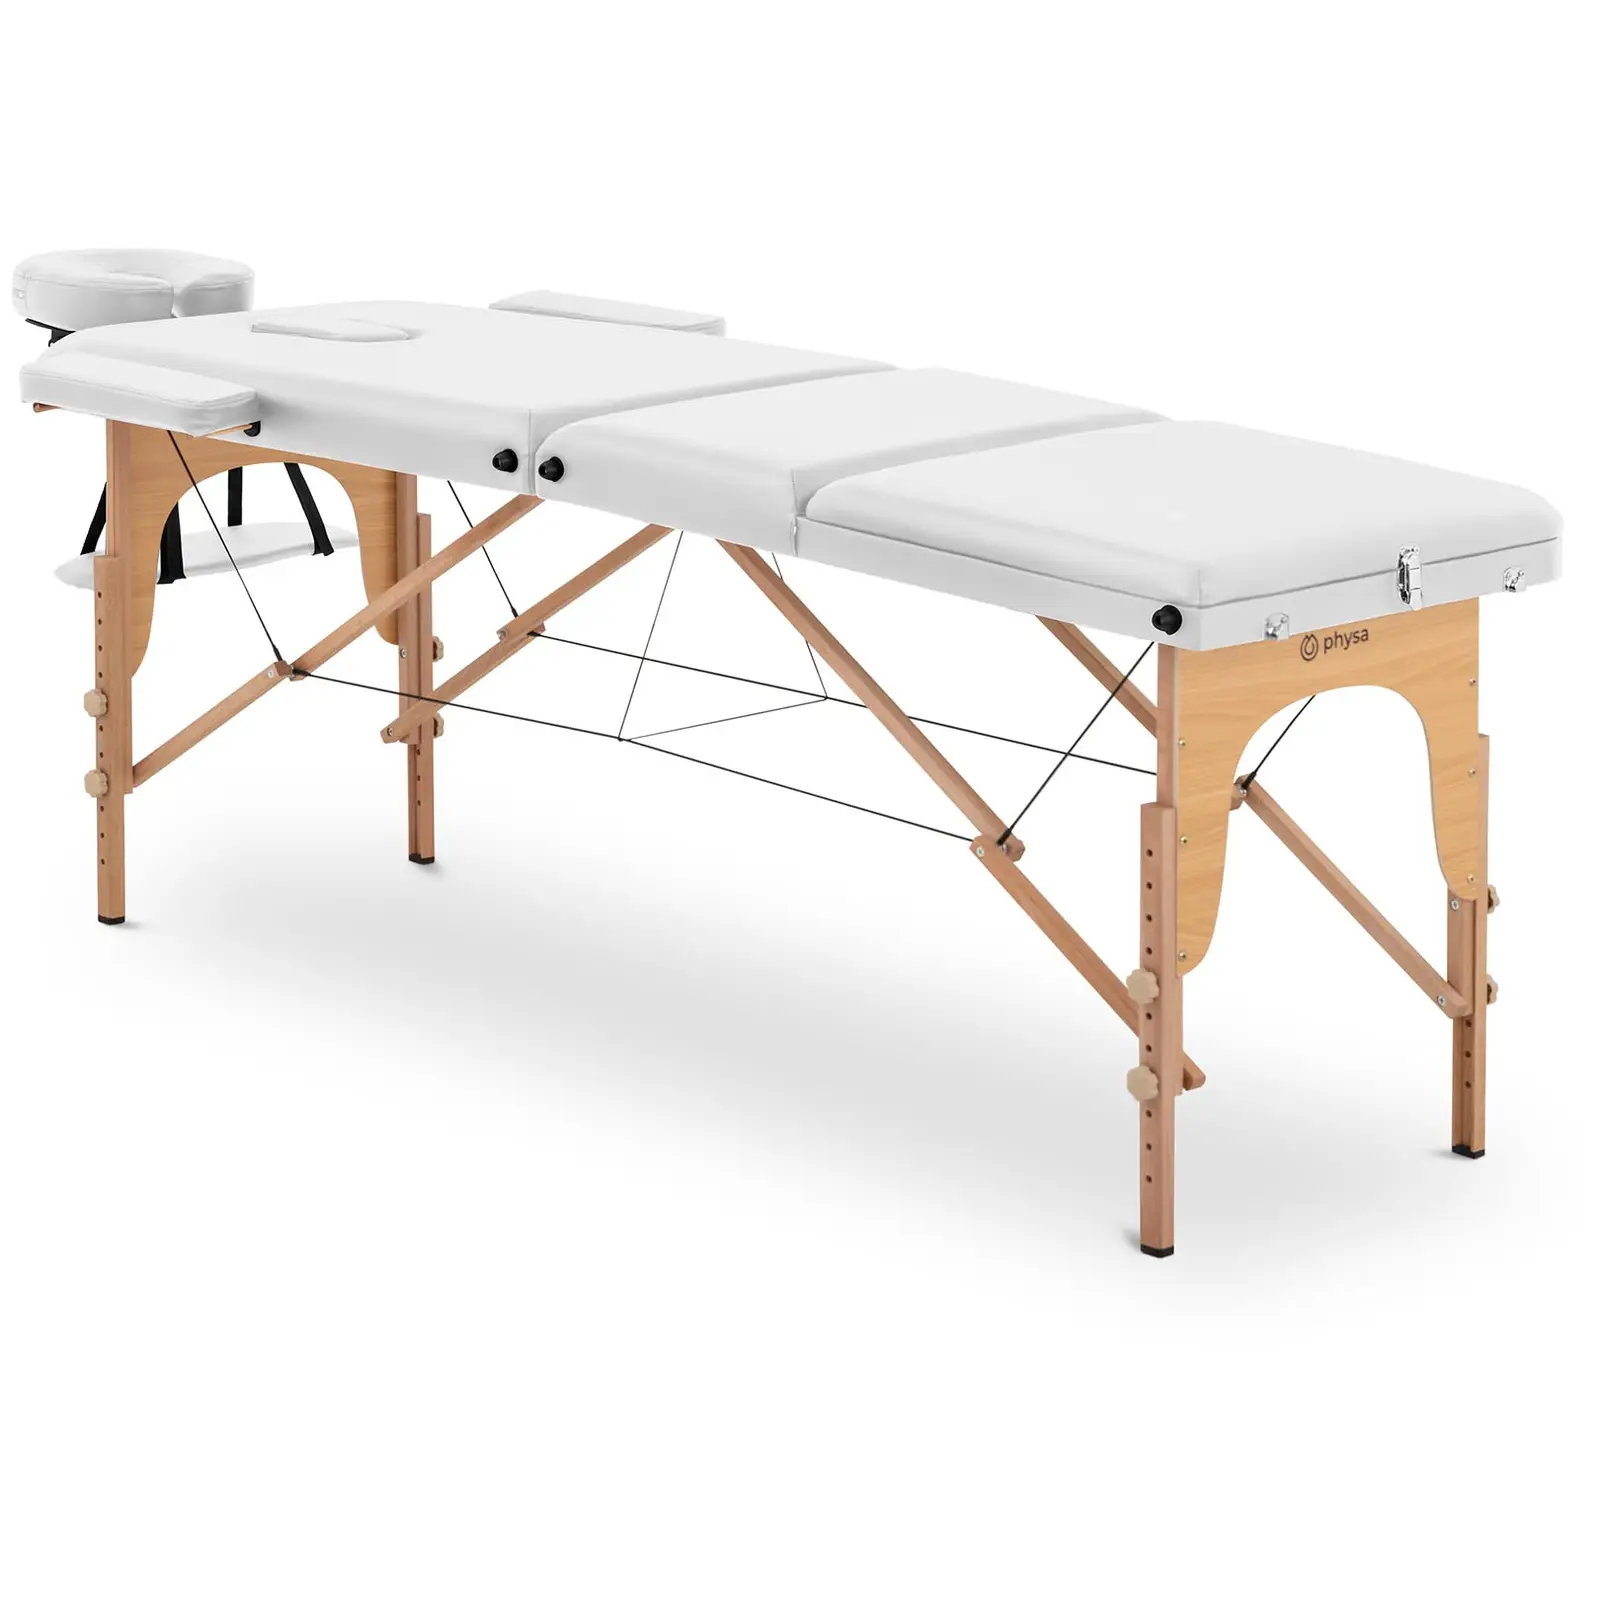 Foldable Massage Table - inclining footrest - beech wood - extra wide (70cm) - white